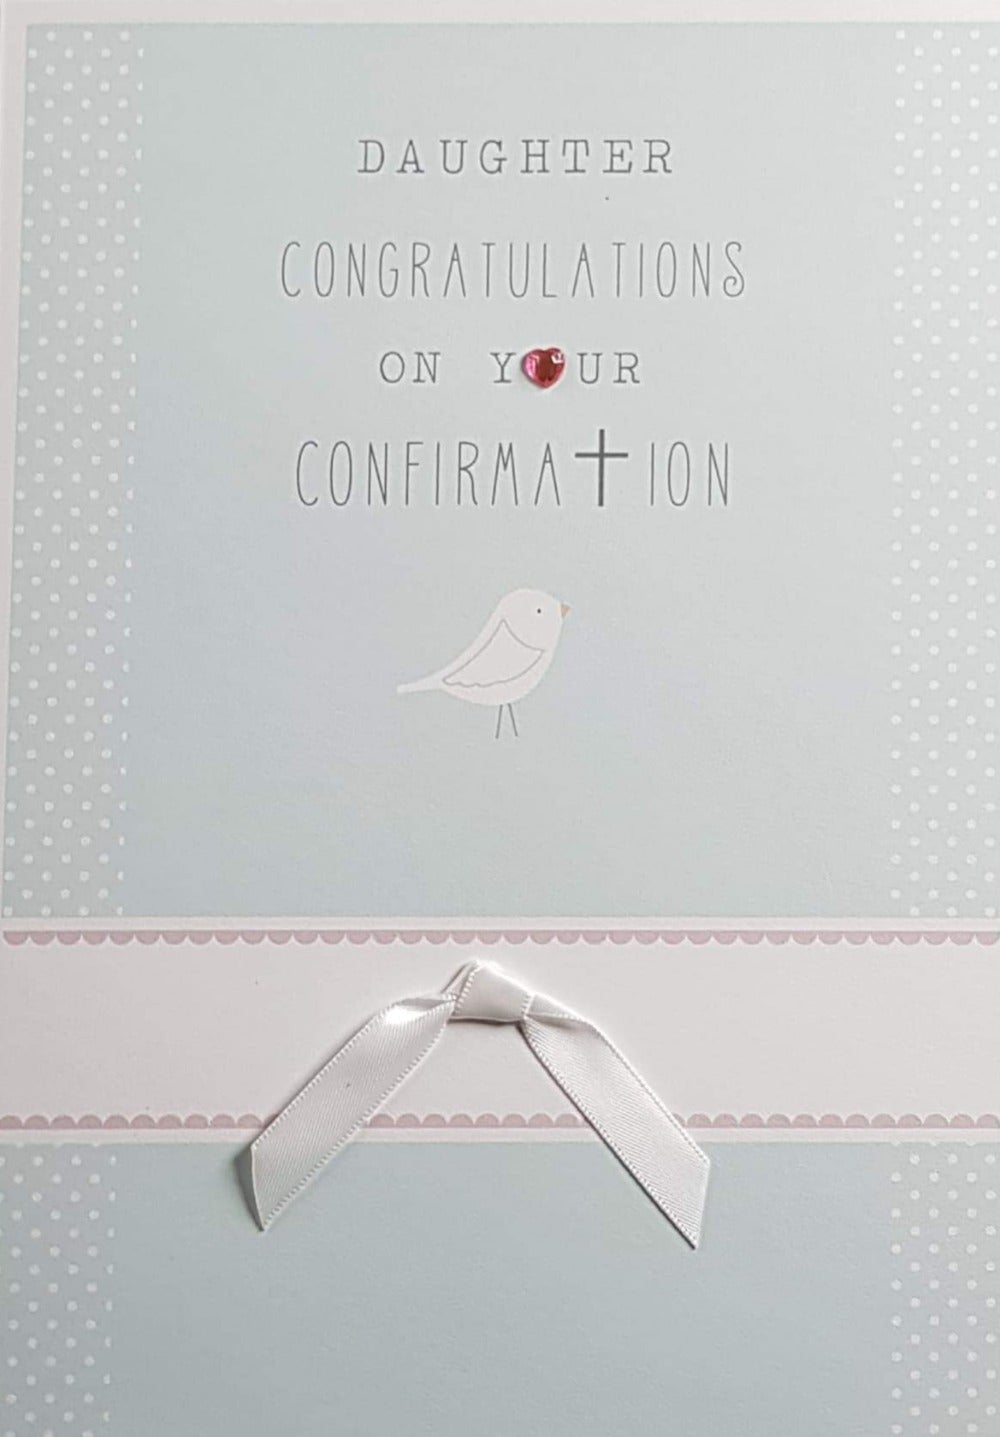 Confirmation Card - Daughter / White Bow & White Bird